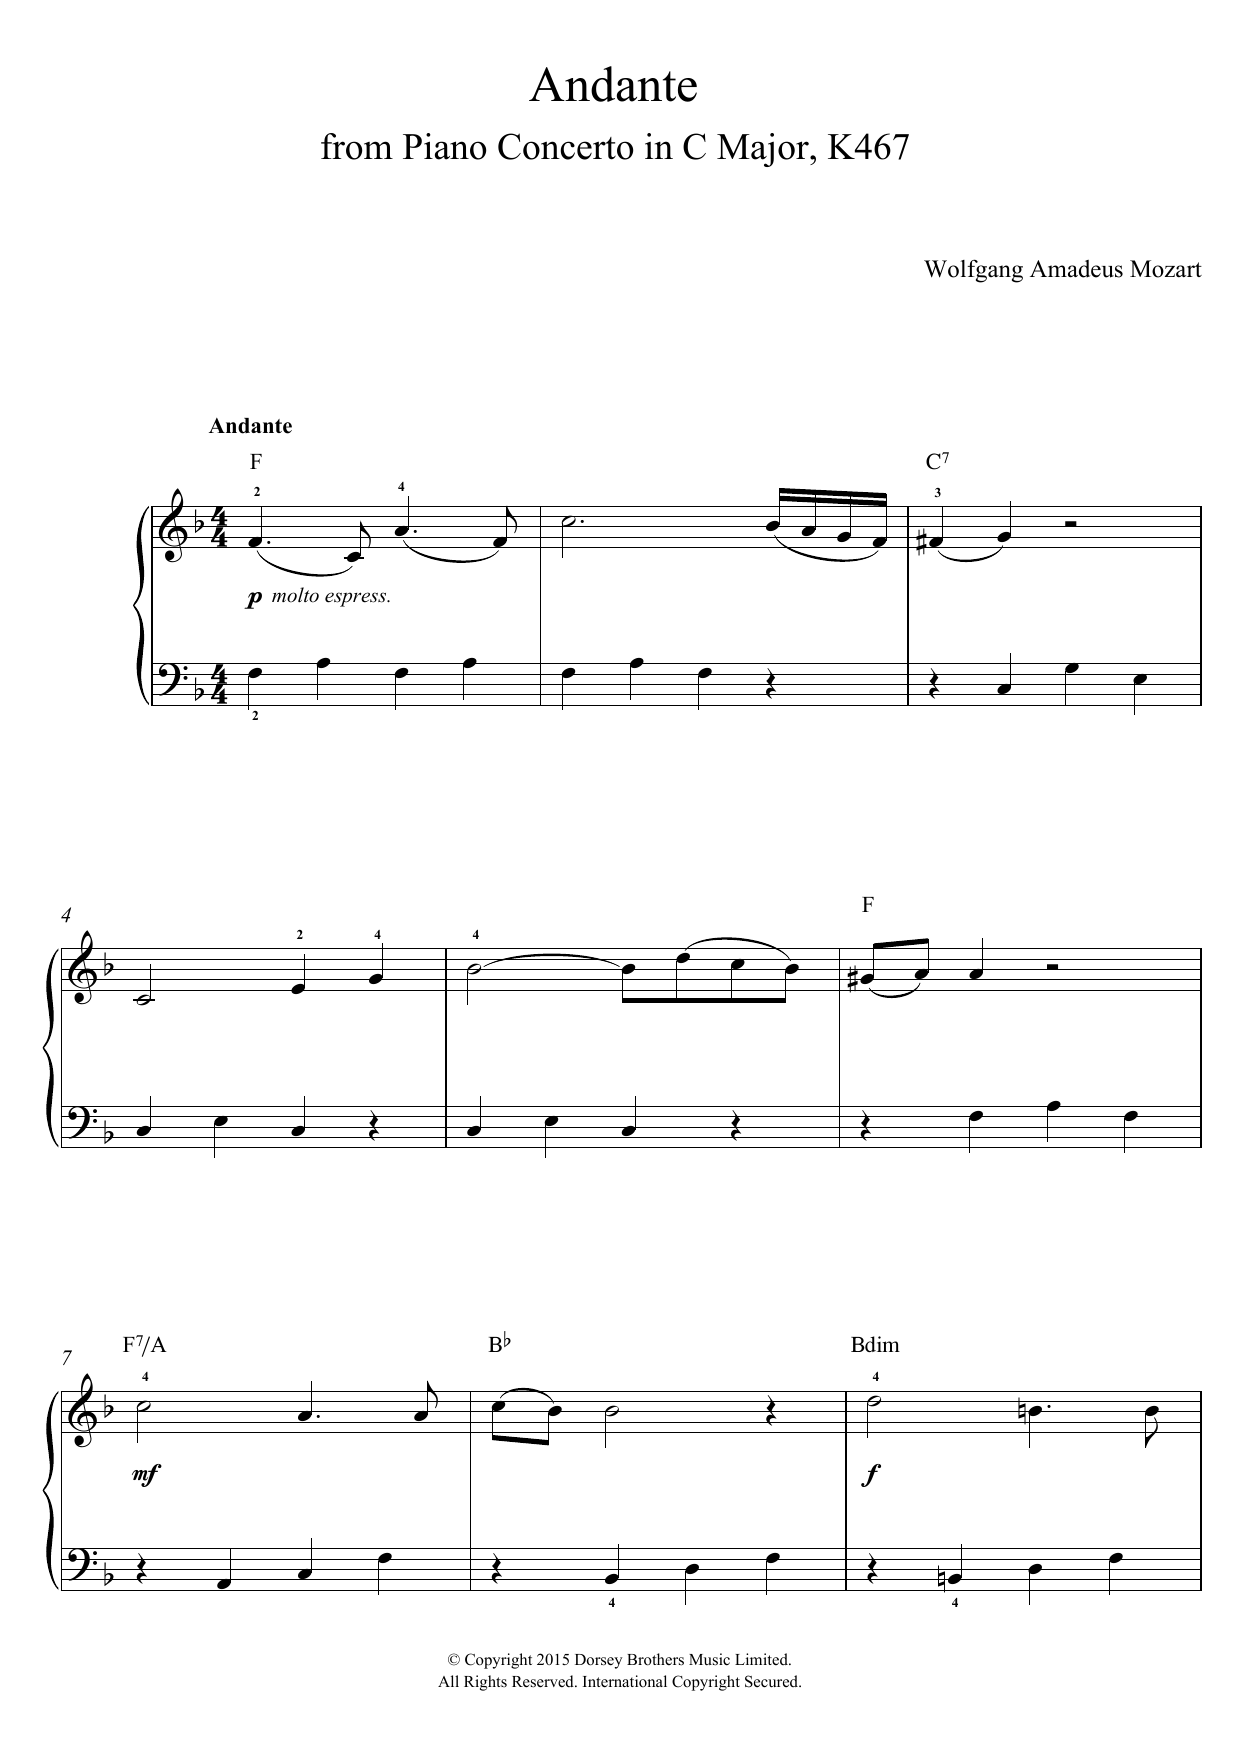 Download Wolfgang Amadeus Mozart Andante from Piano Concerto in C Major Sheet Music